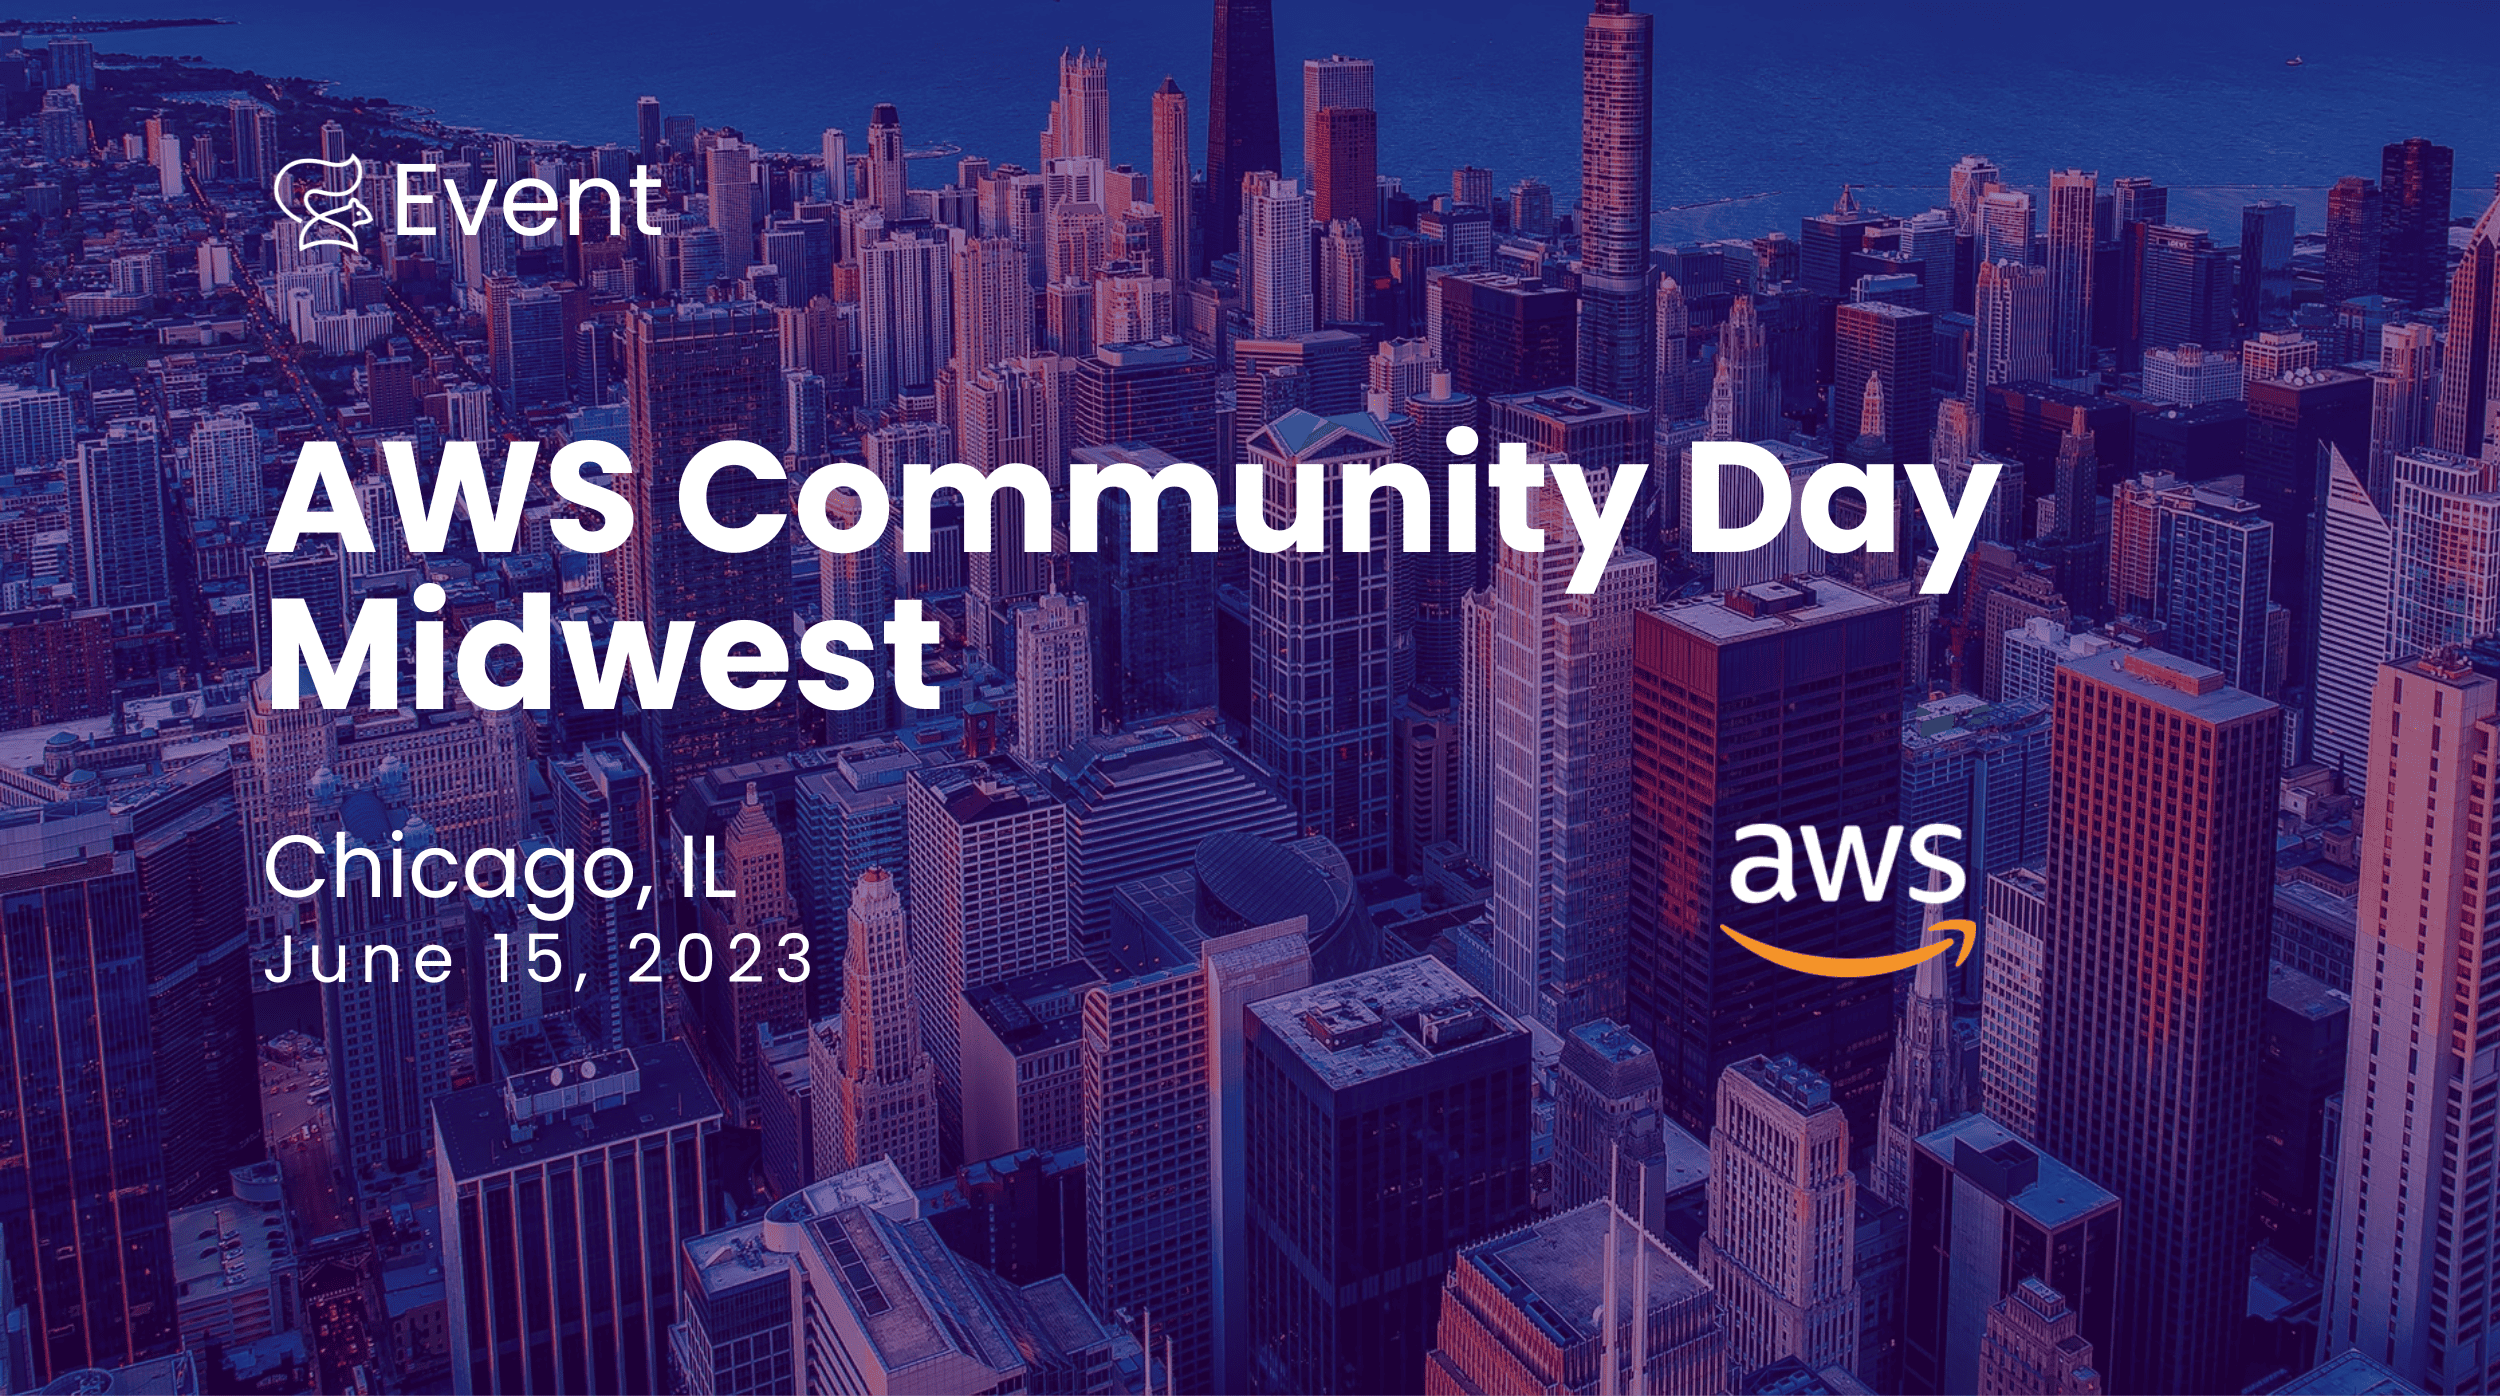 AWS Community Day Midwest – June 15, 2023